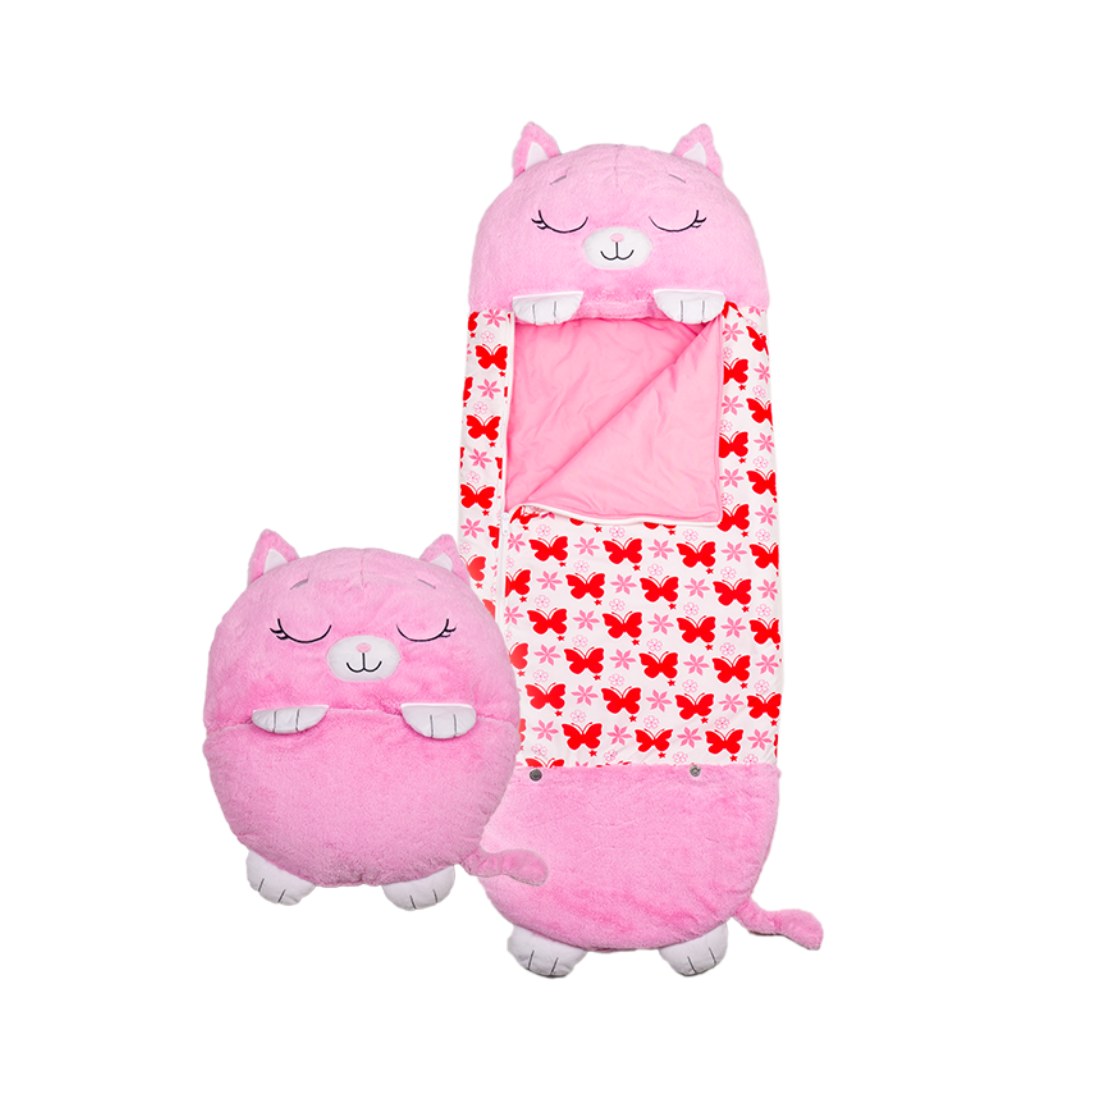 View Happy Nappers Pink Kitty Large Ages 7 Plush Toy That Opens To A Fun Sleeping Bag High Street TV information